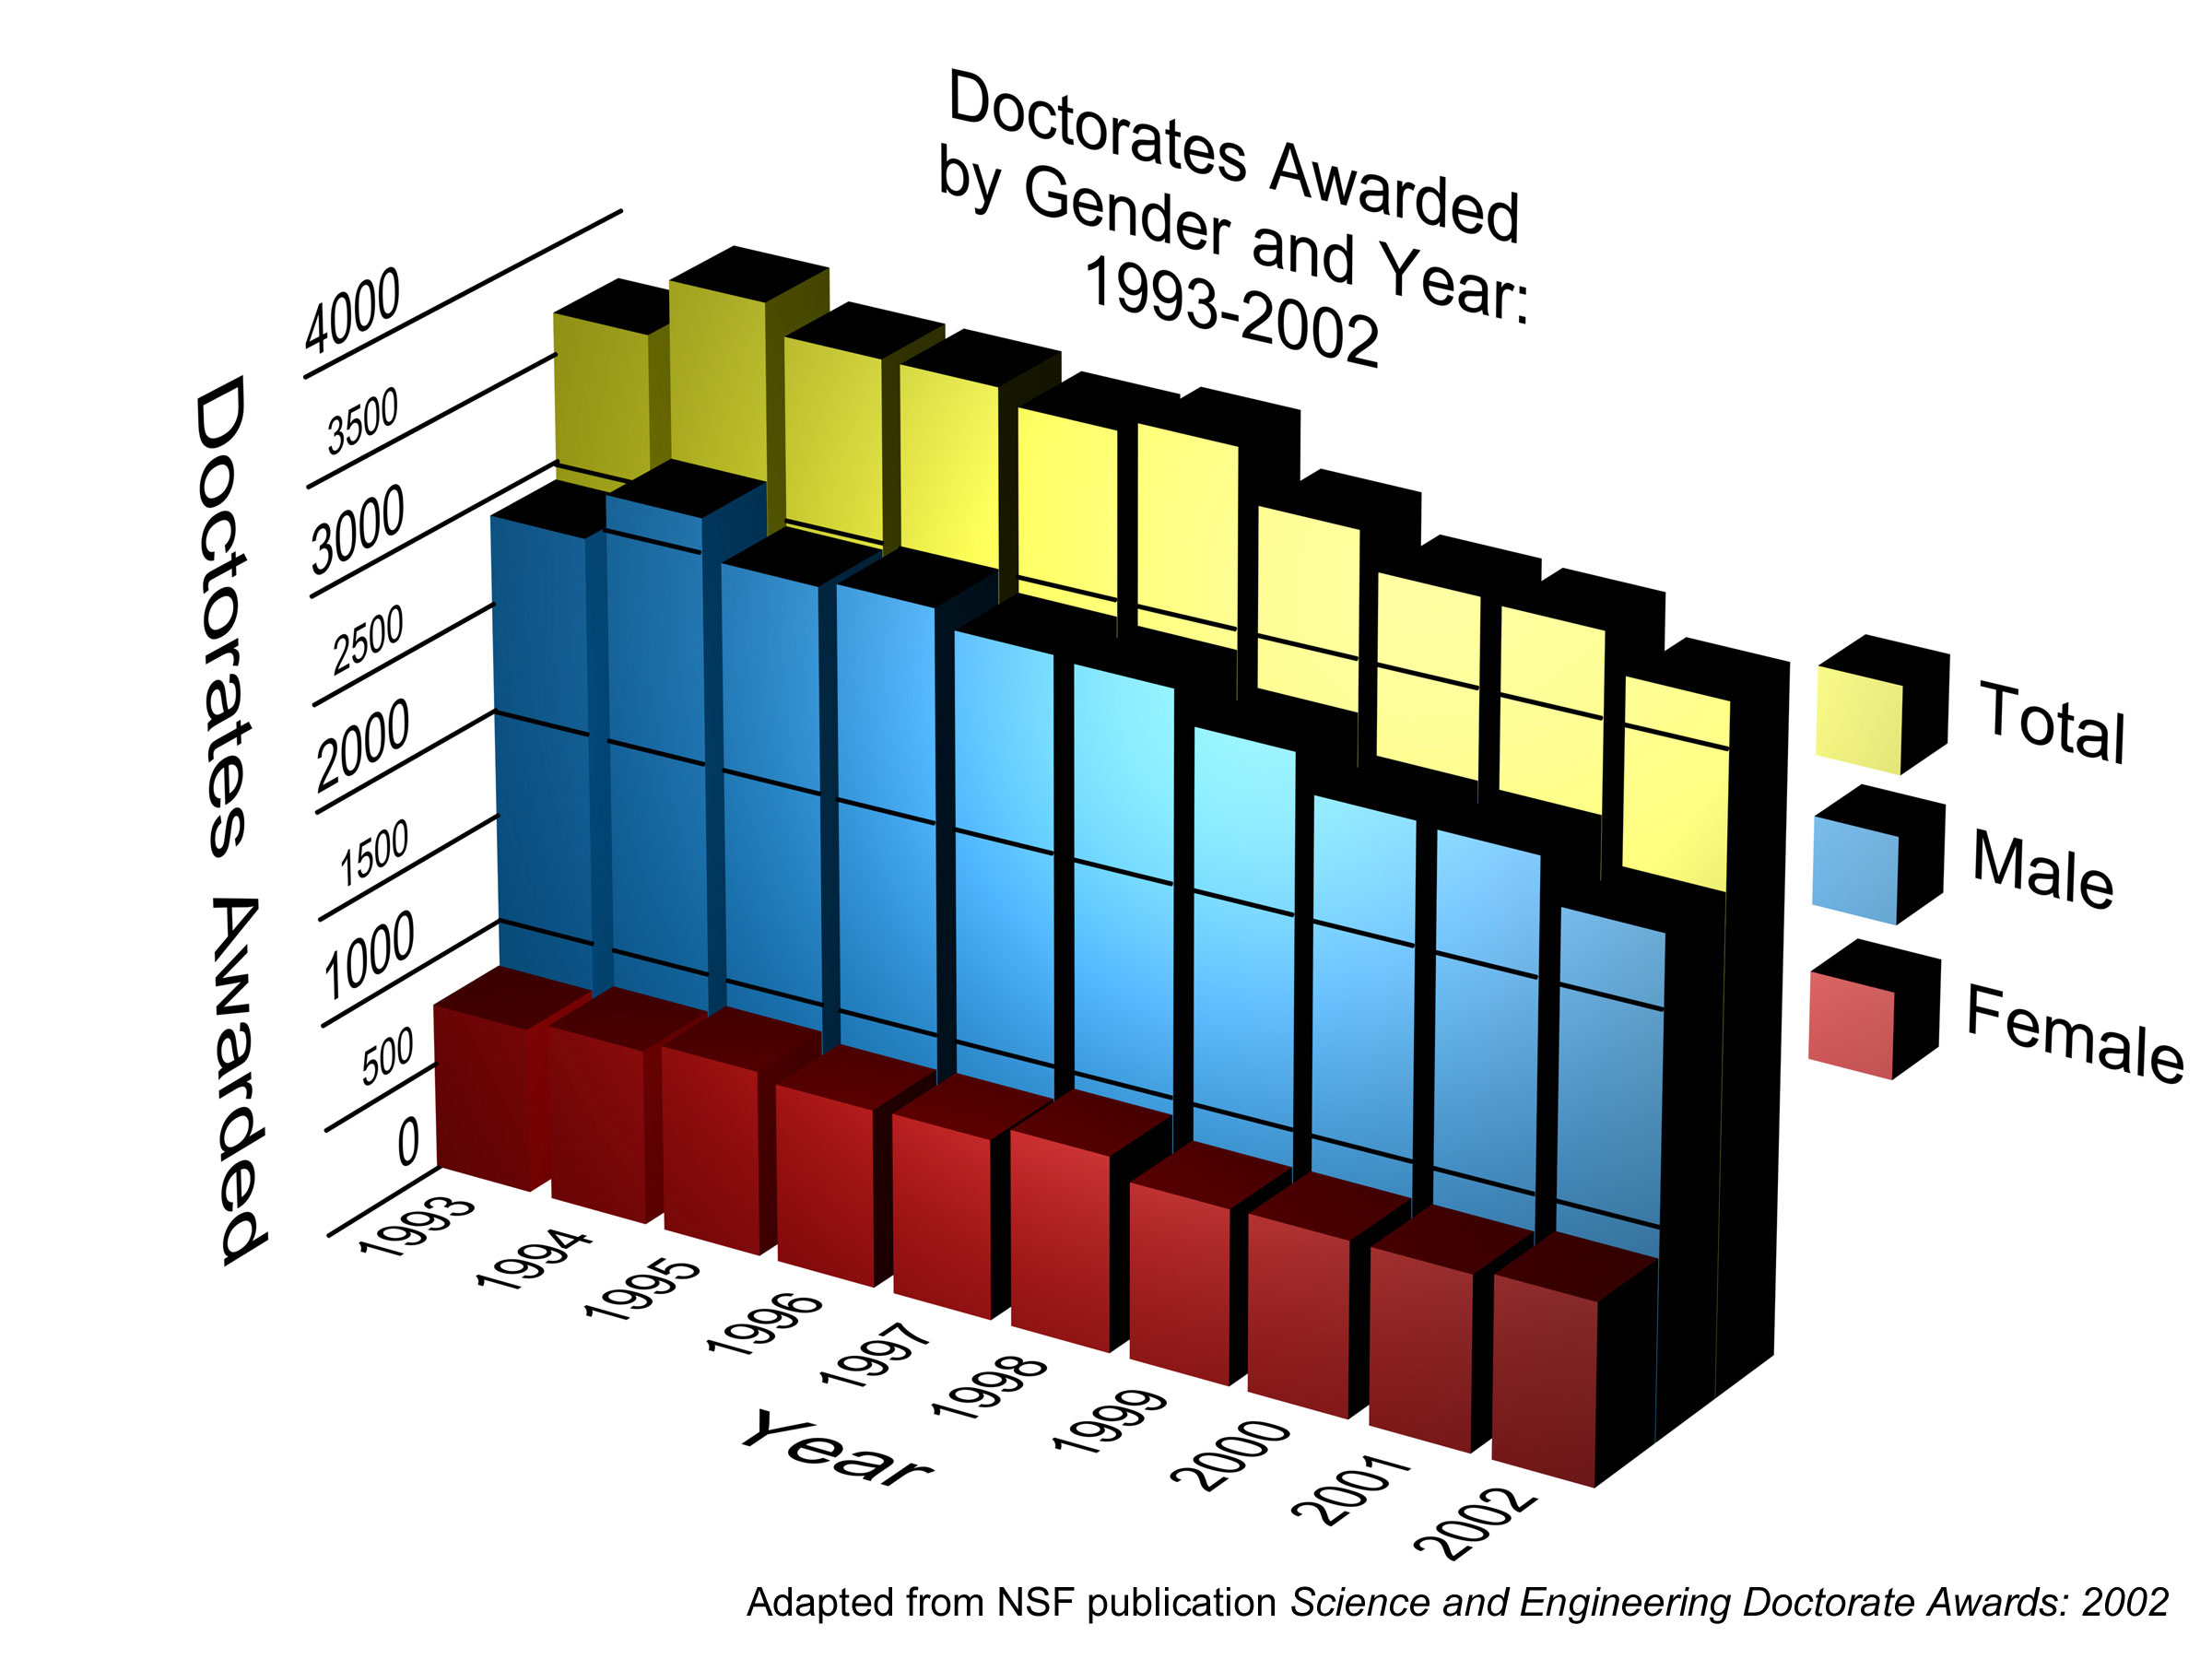 Doctorates Awarded by Gender